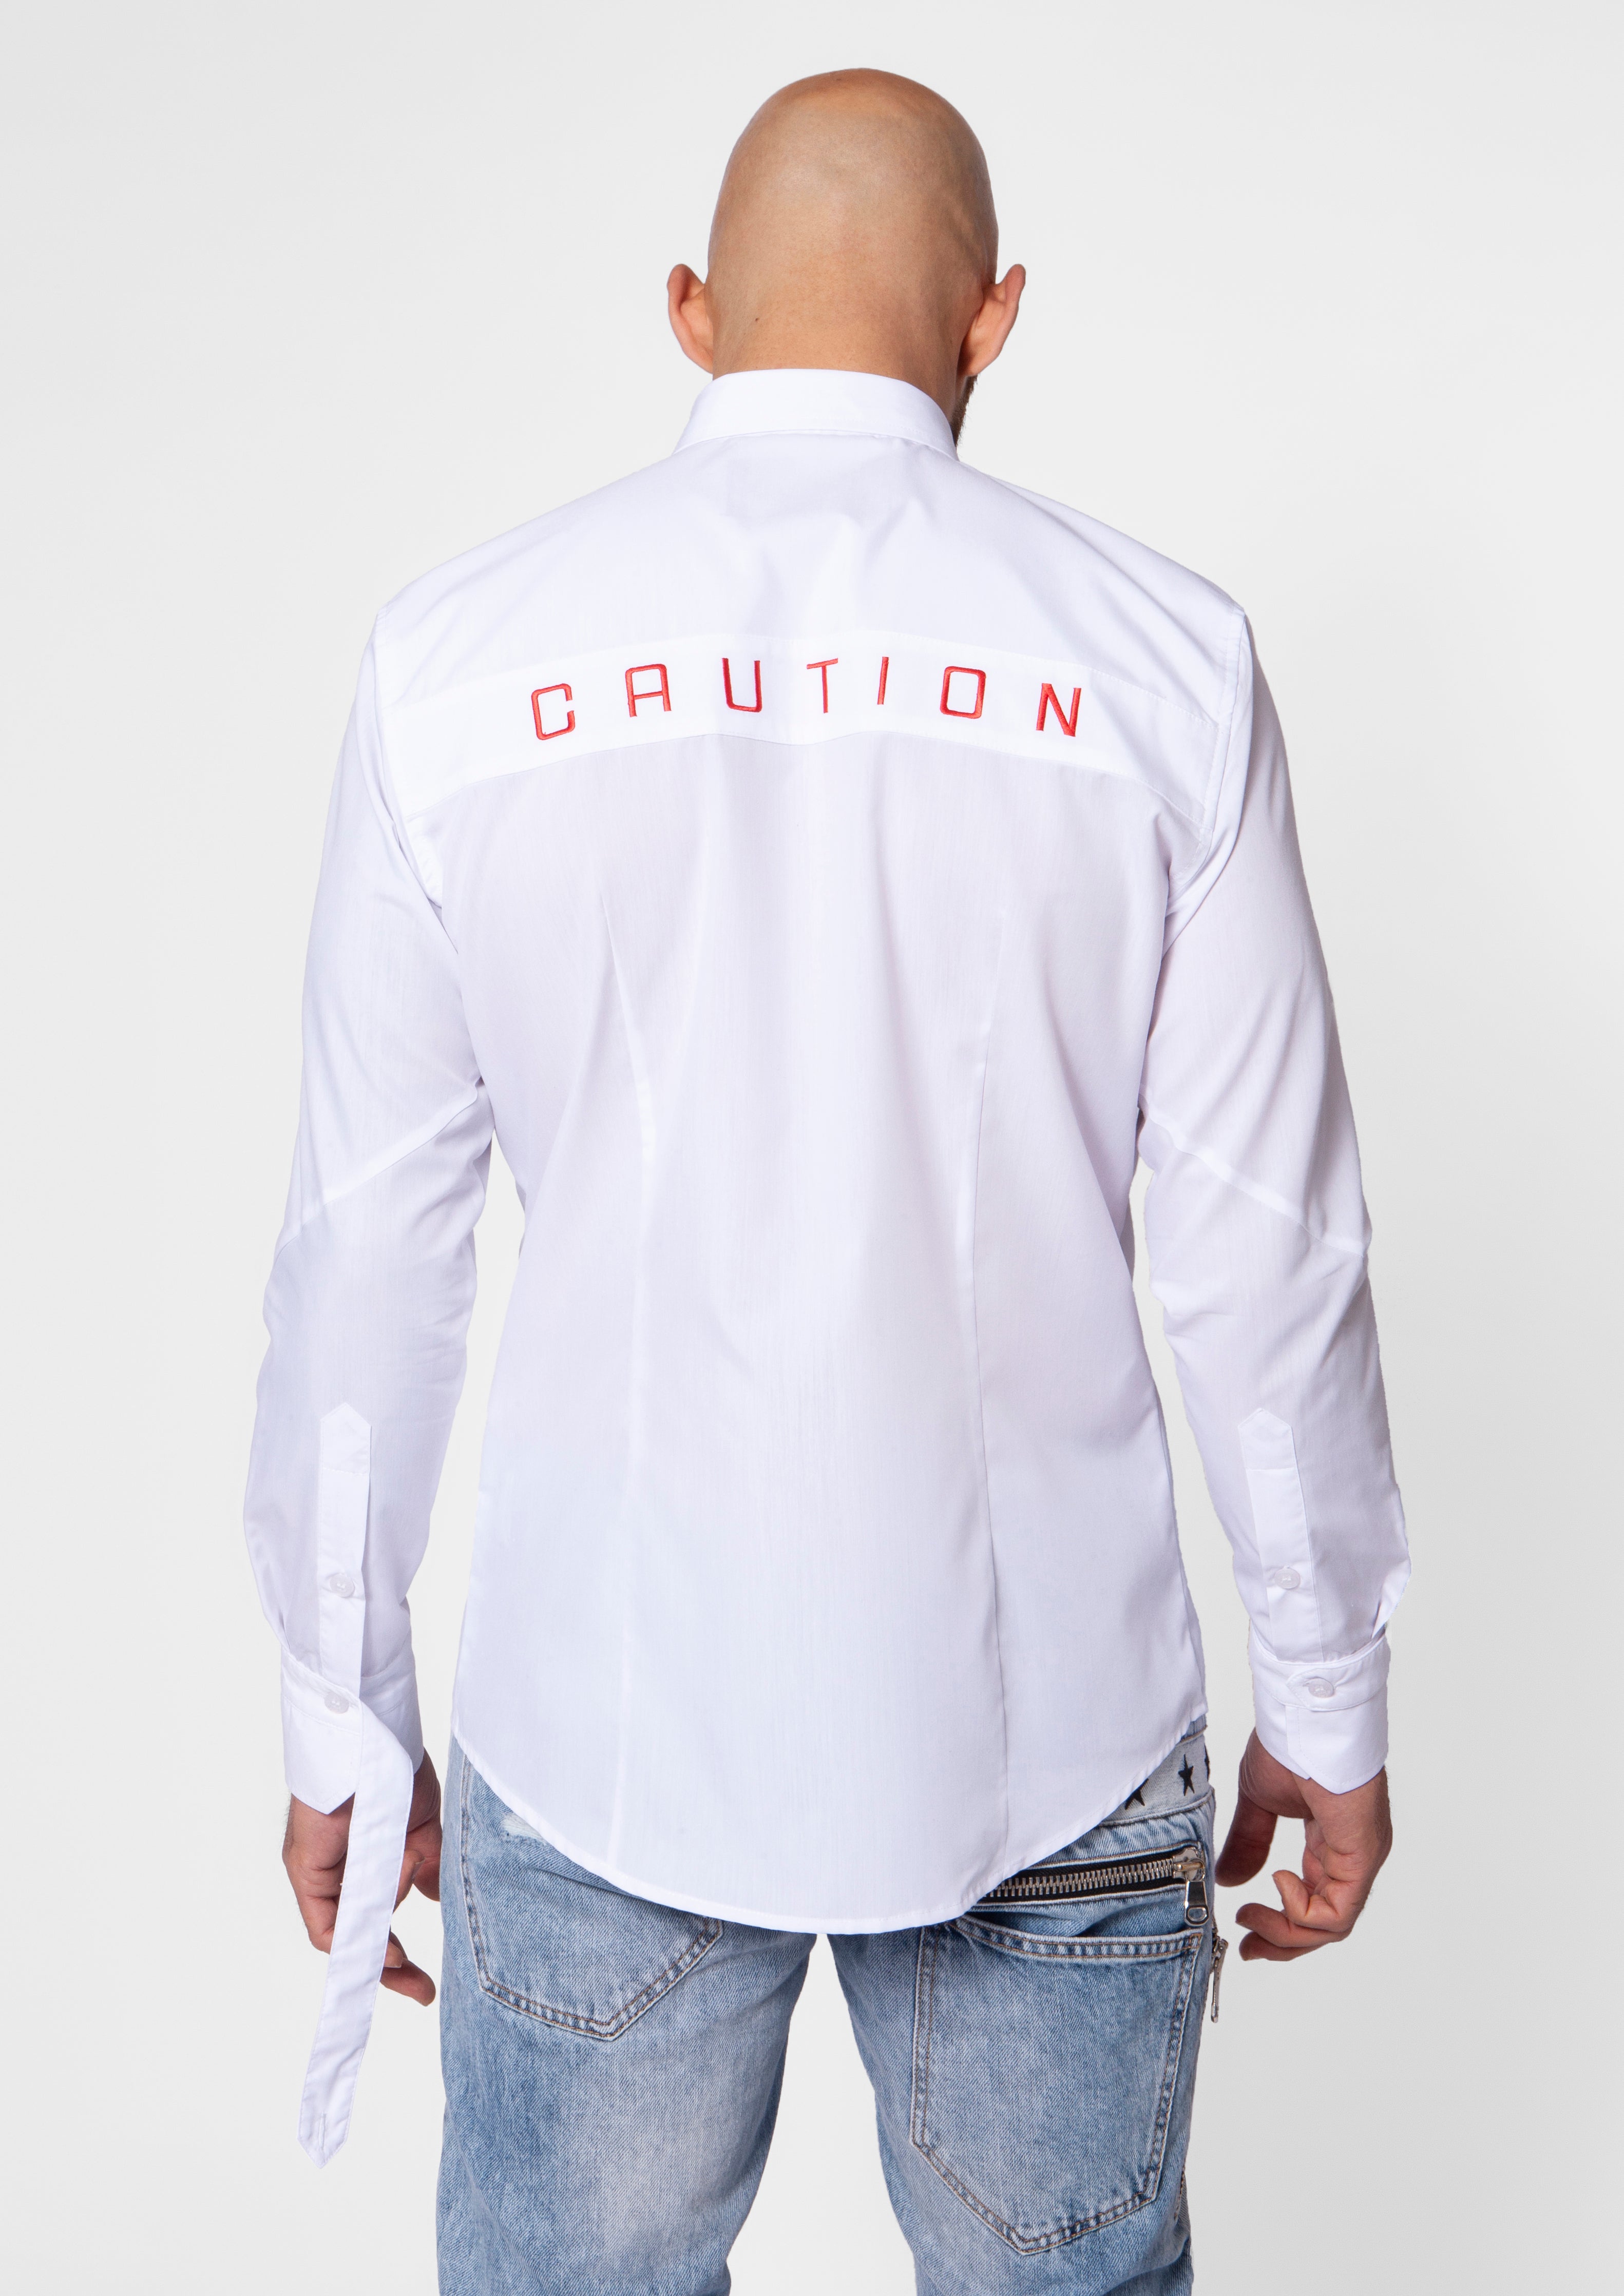 Signature Red Caution - Do Not Enter Loop White Shirt